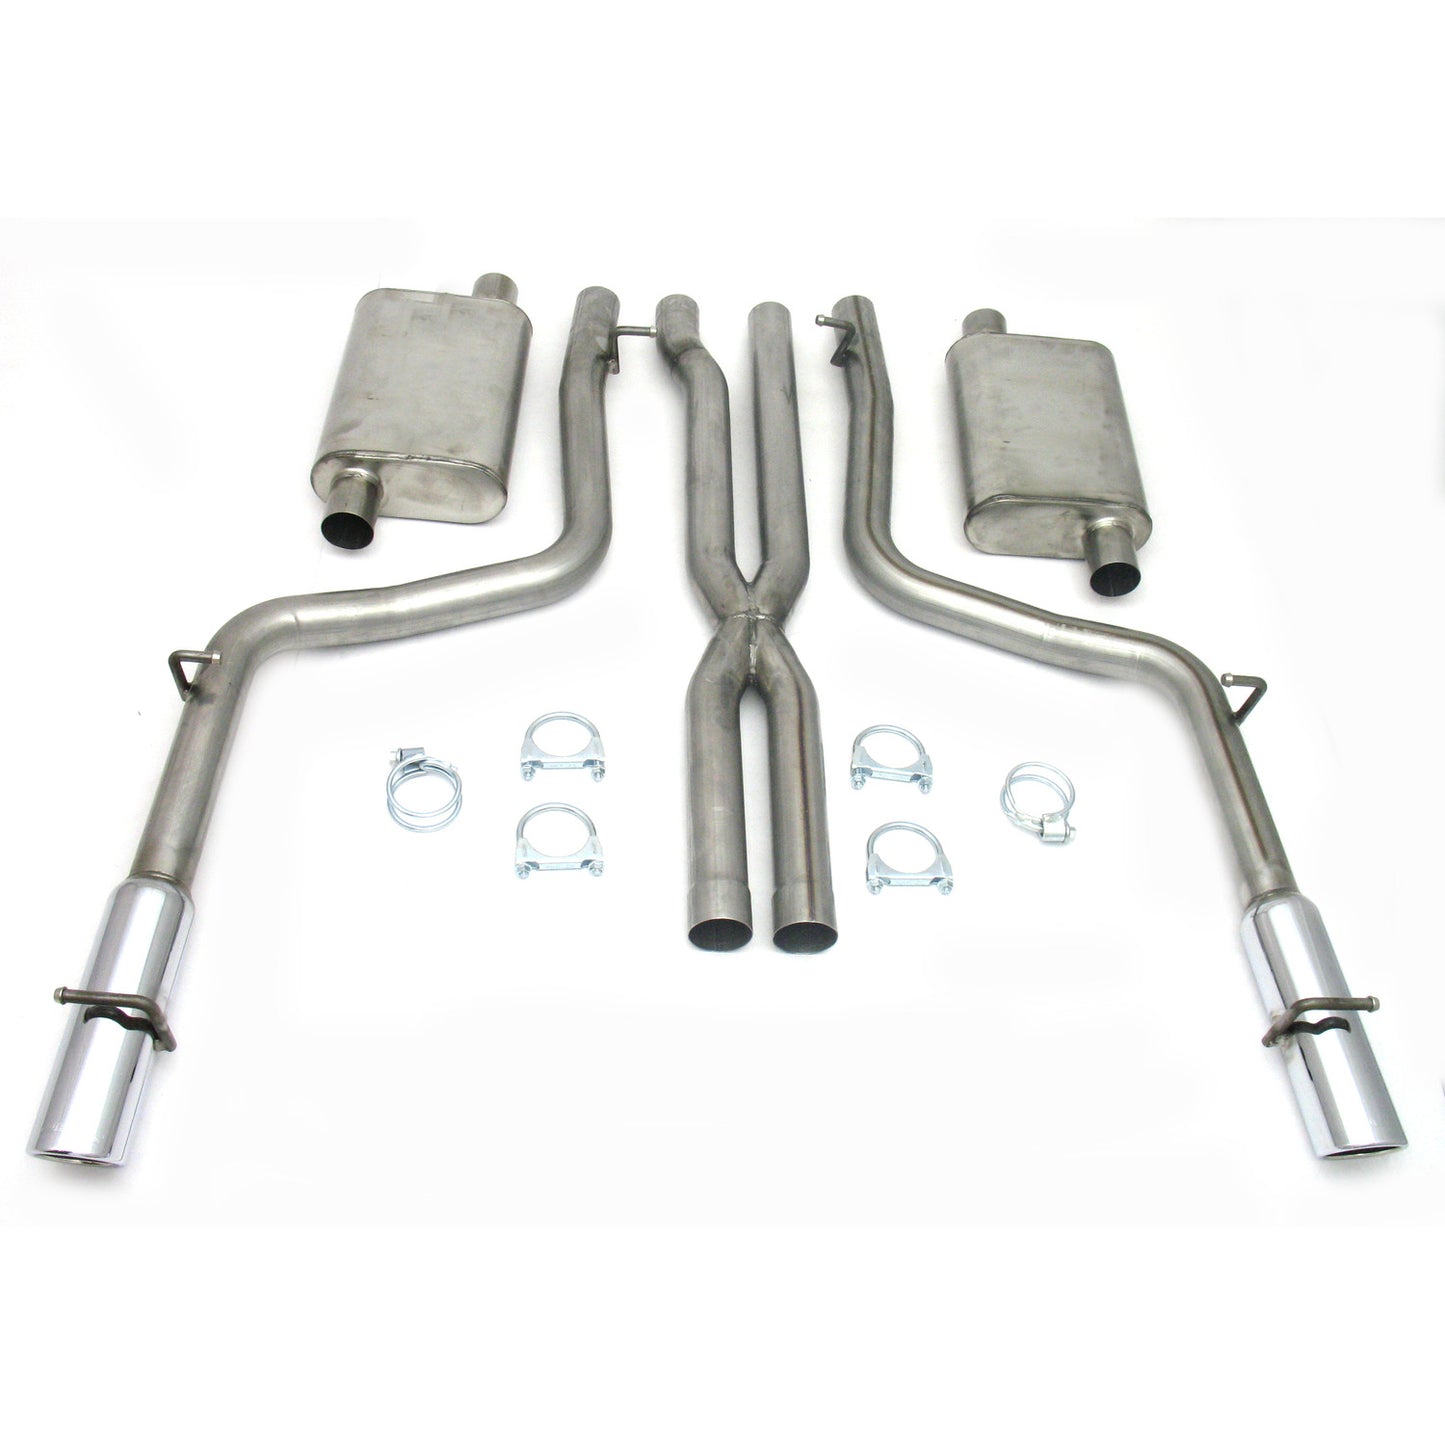 JBA Performance Exhaust 40-1600 2.5" Stainless Steel Exhaust System 05-10 Dodge Charger/Magnum/300C